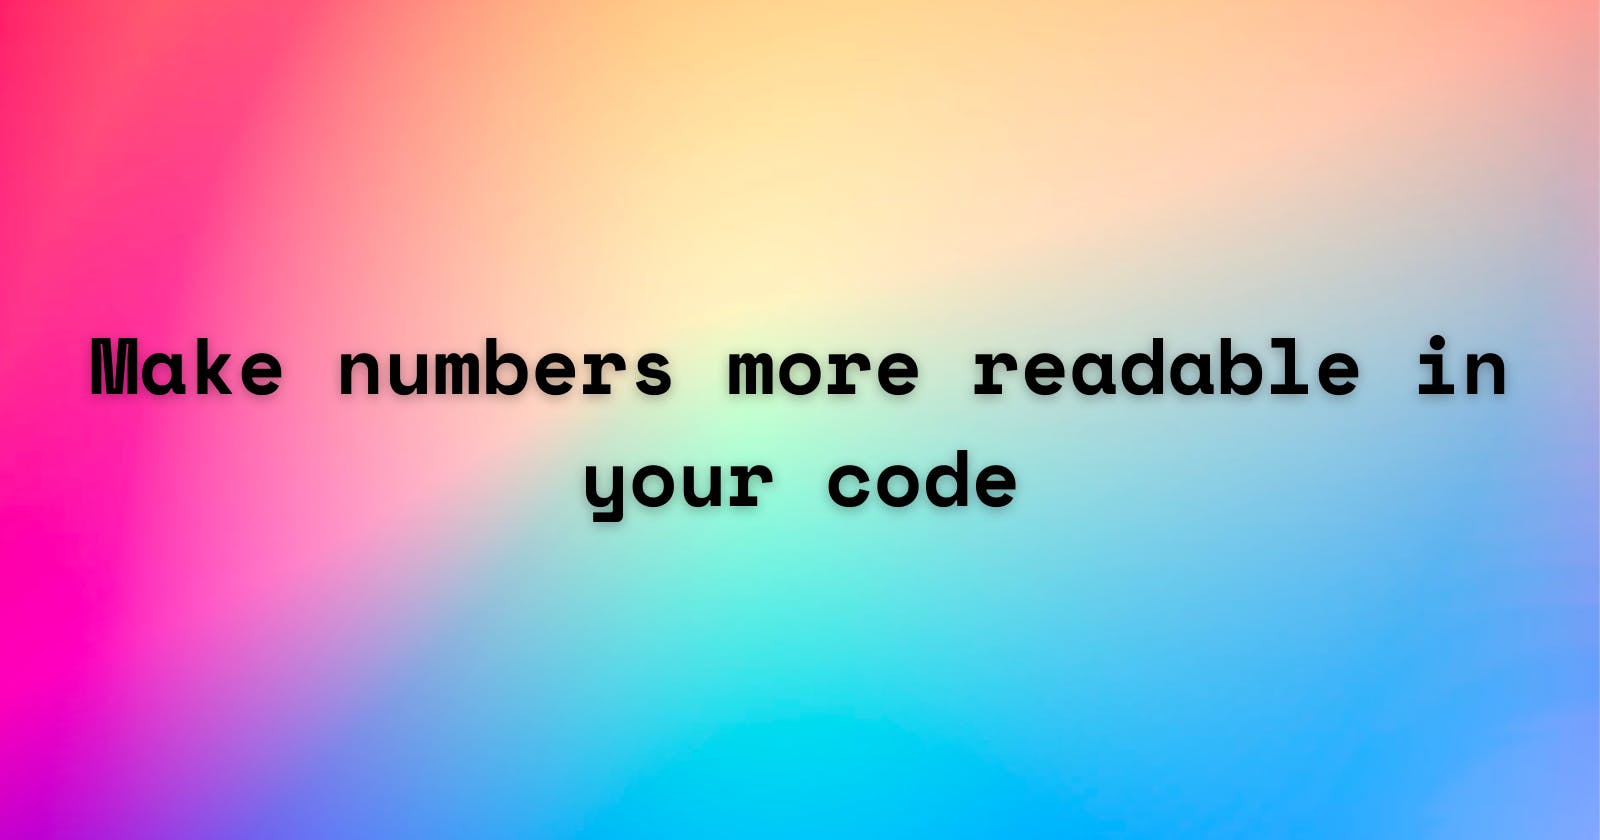 This is how you make numbers more readable in your JS code